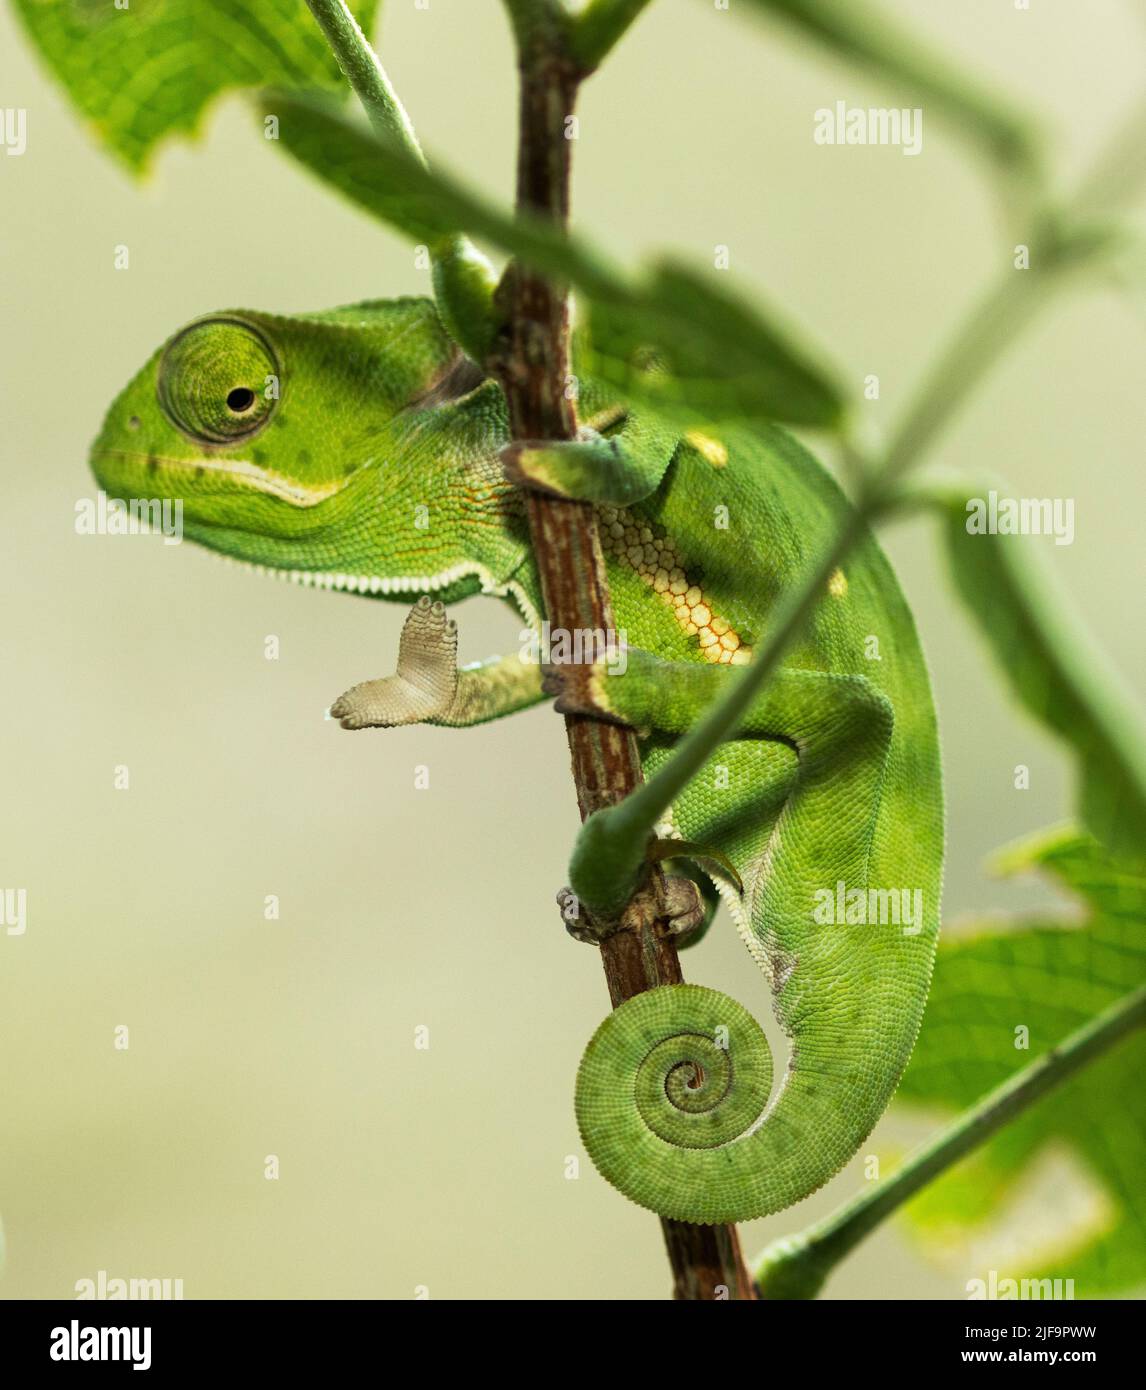 The unique foot structure of the Chameleon can be seen, A Zygodactyl foot with three and two toes fused together for a special arboreal grip Stock Photo